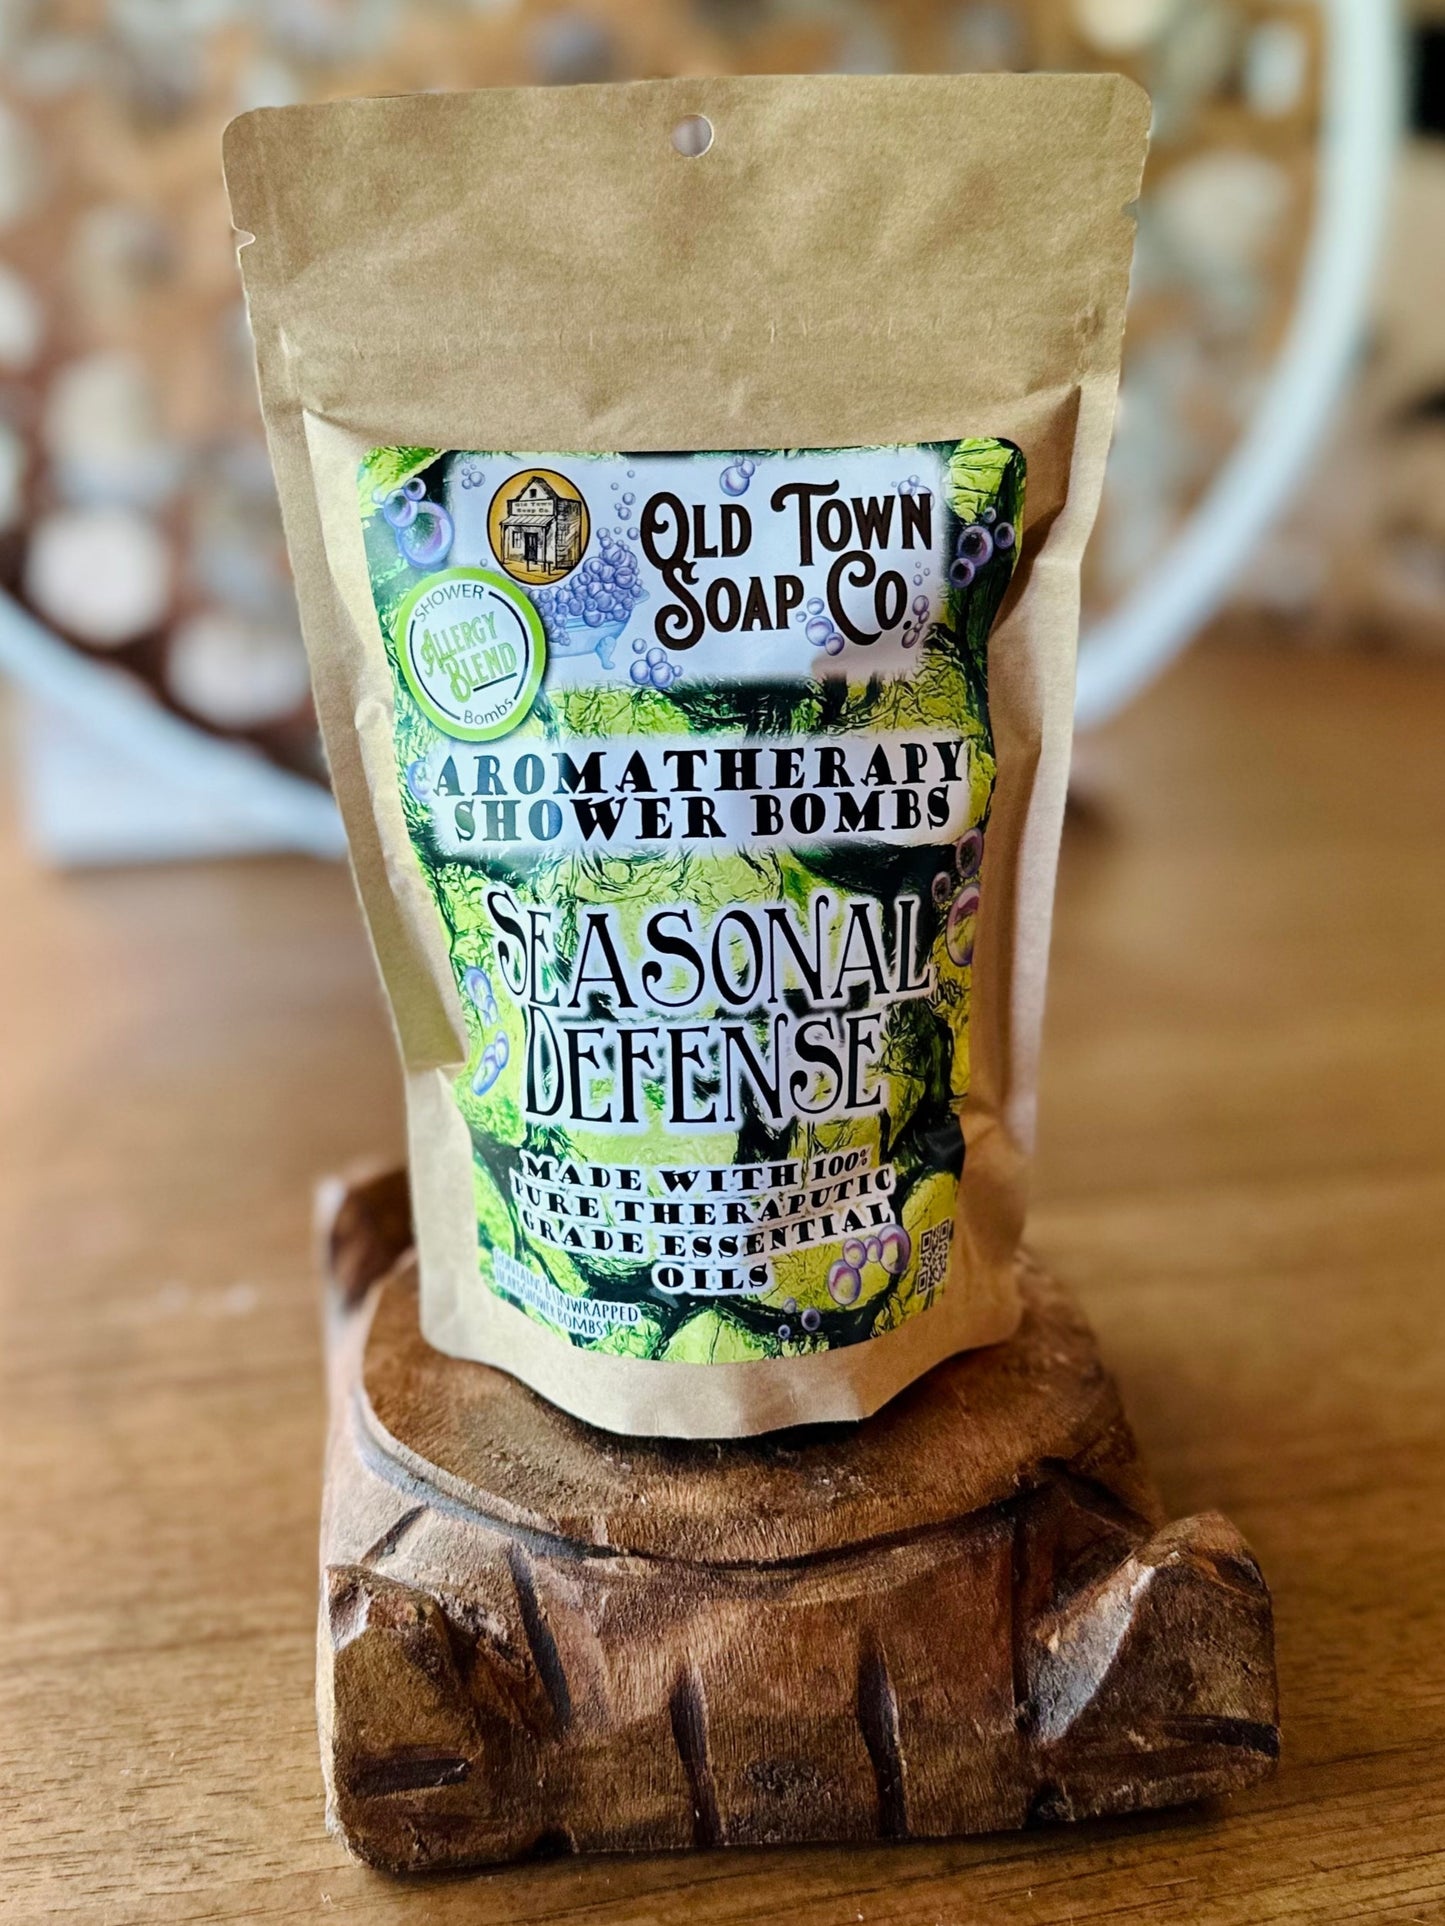 Shower Bombs - Old Town Soap Co.